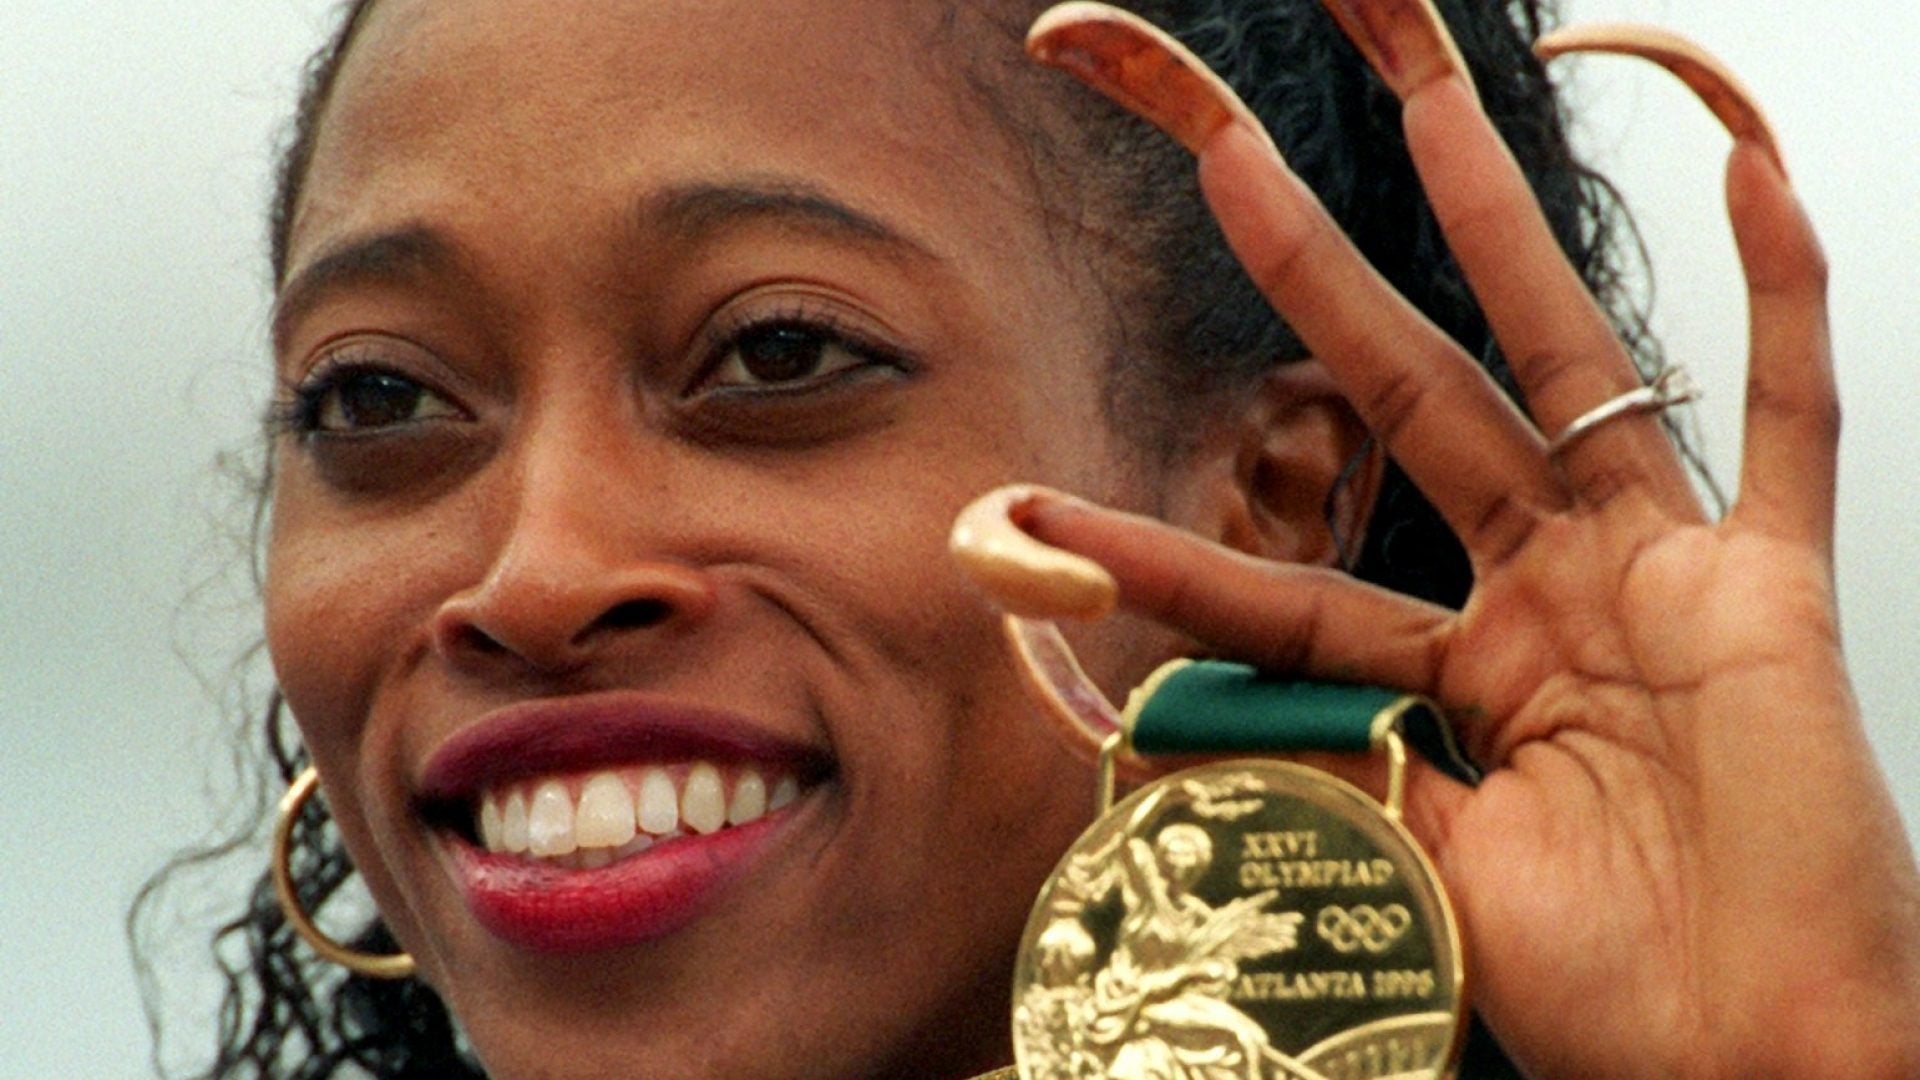 Olympic Legend Gail Devers' Signature Nails Were Stylish — And A Sign She Had Control Of Her Graves' Disease